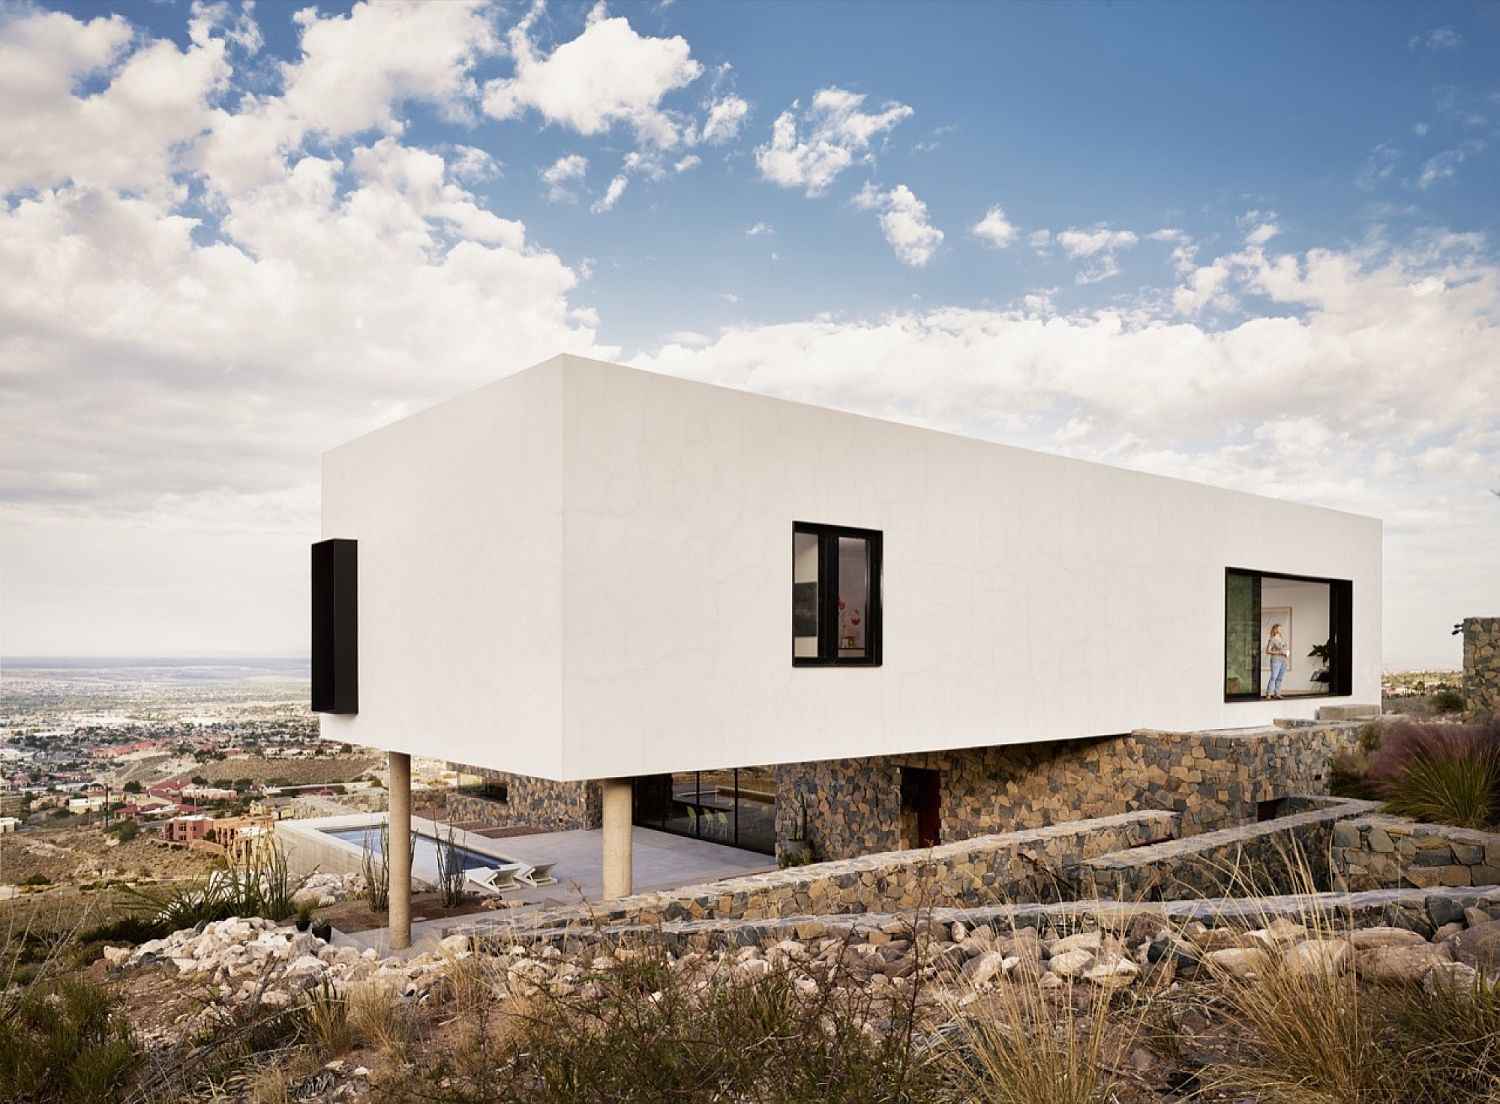 Straight lines and a facade in white give the mountain home a contemporary look